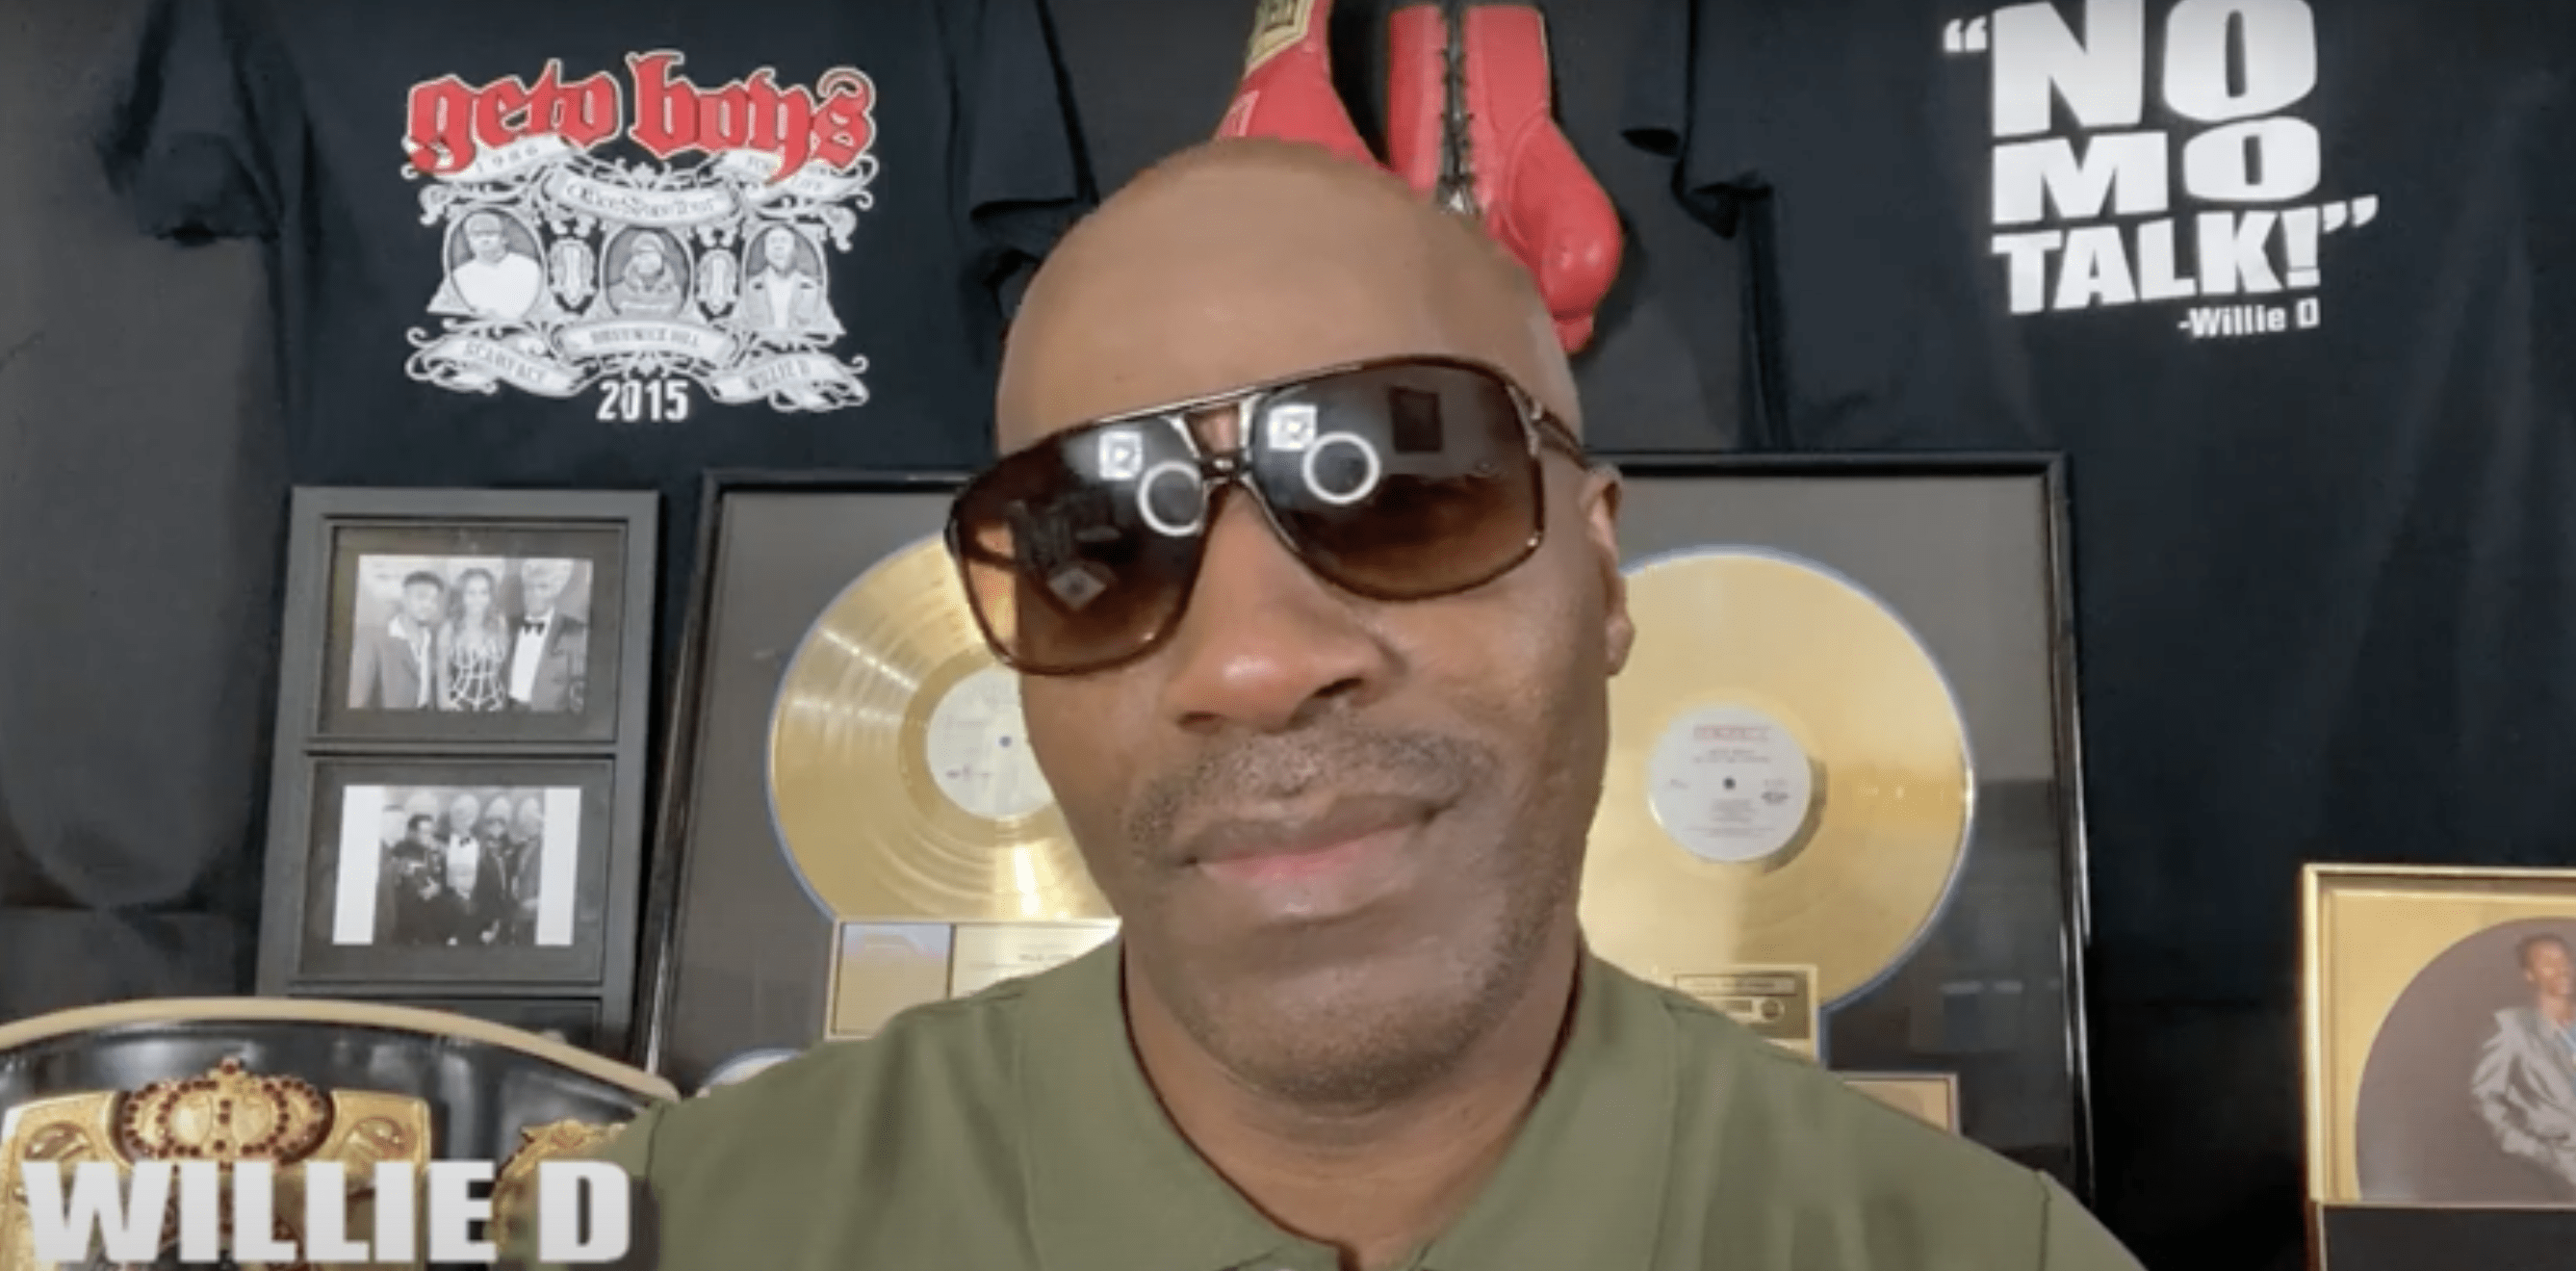 Willie D From The Geto Boys Joins New Crypto And NFT Company